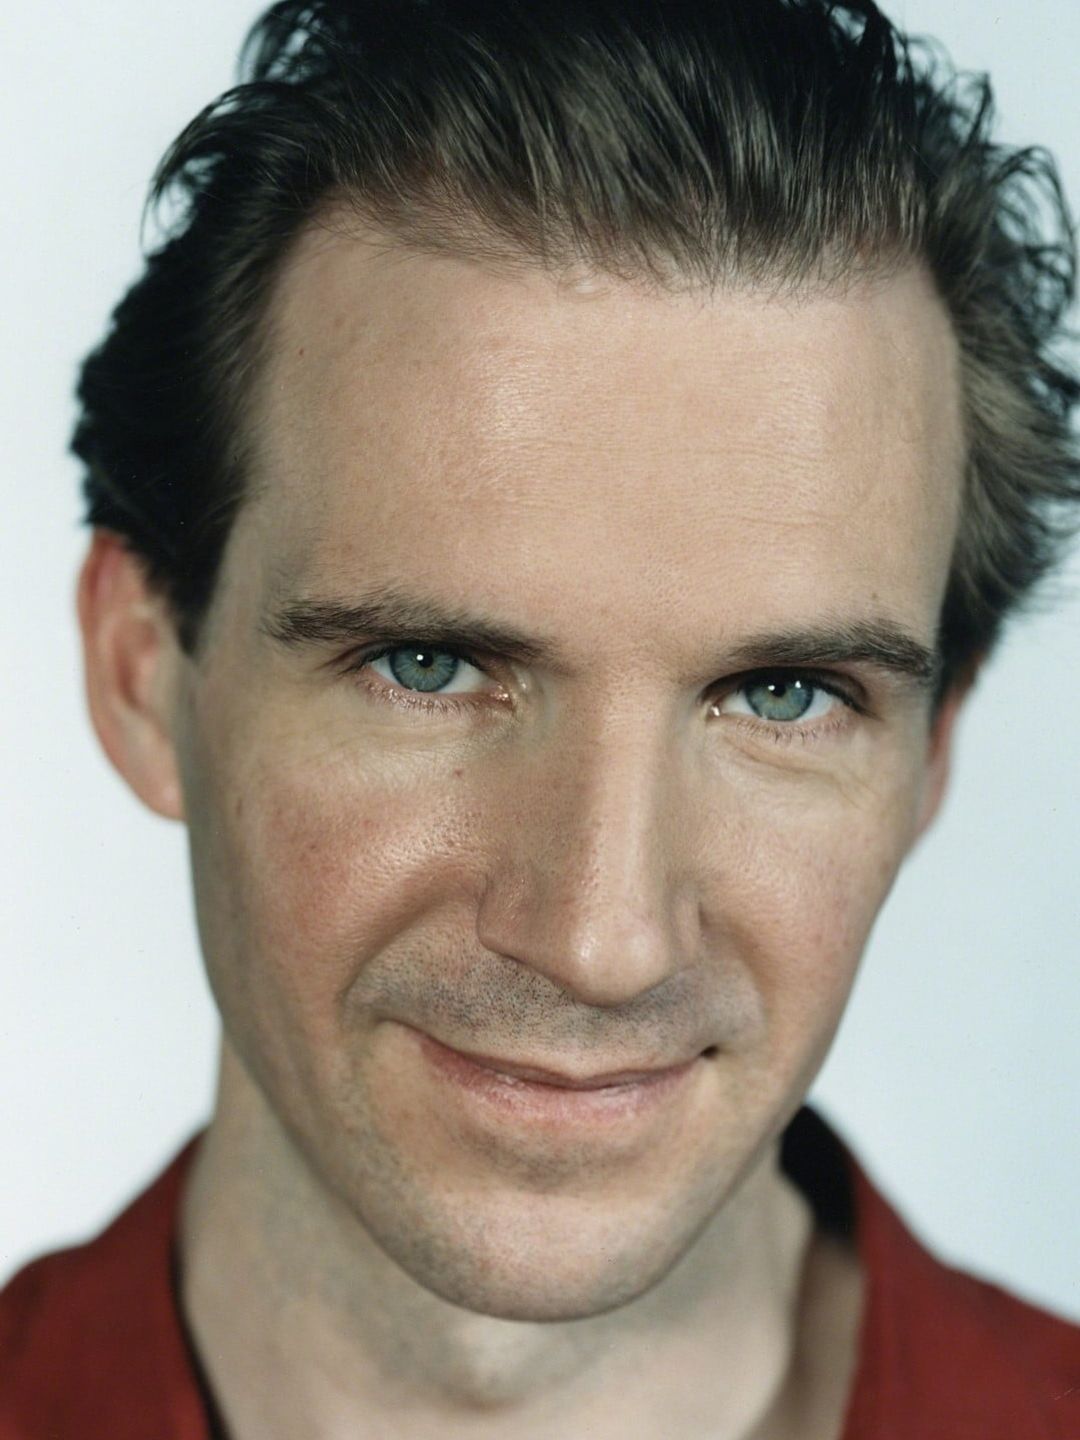 Ralph Fiennes in real life